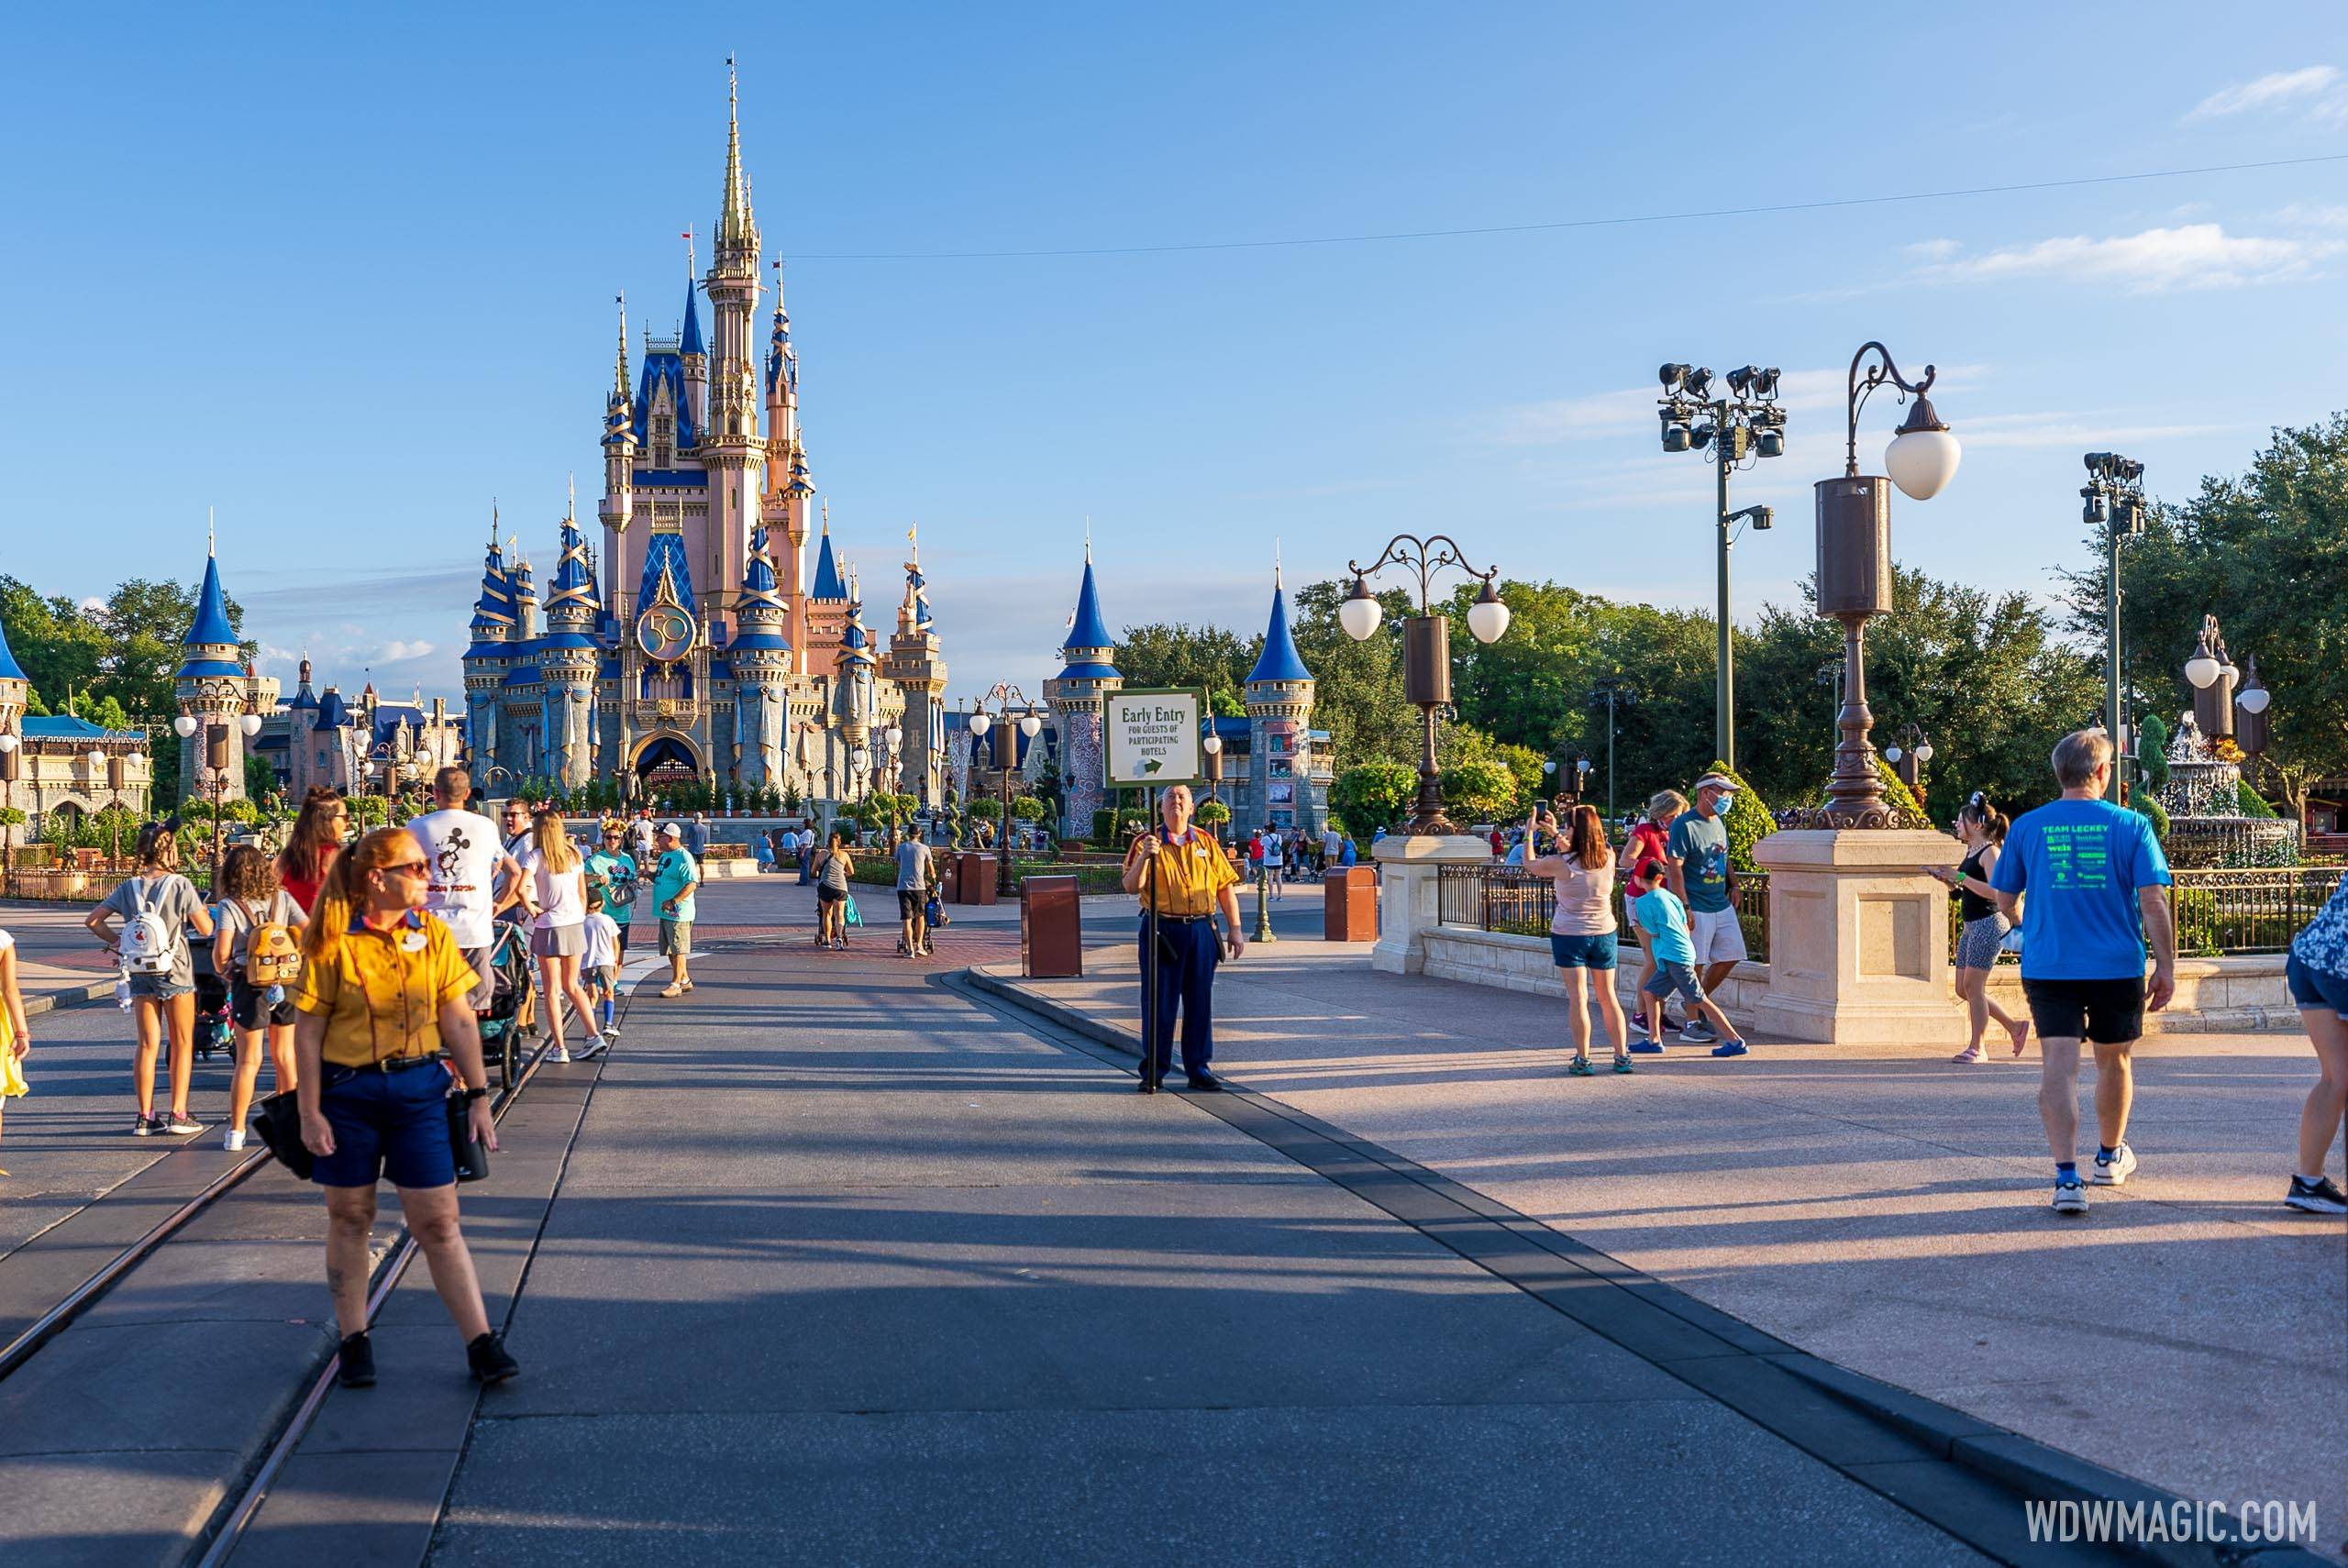 More offsite hotels join Disney hotels for Early Morning Hours at Walt Disney World theme parks through 2024